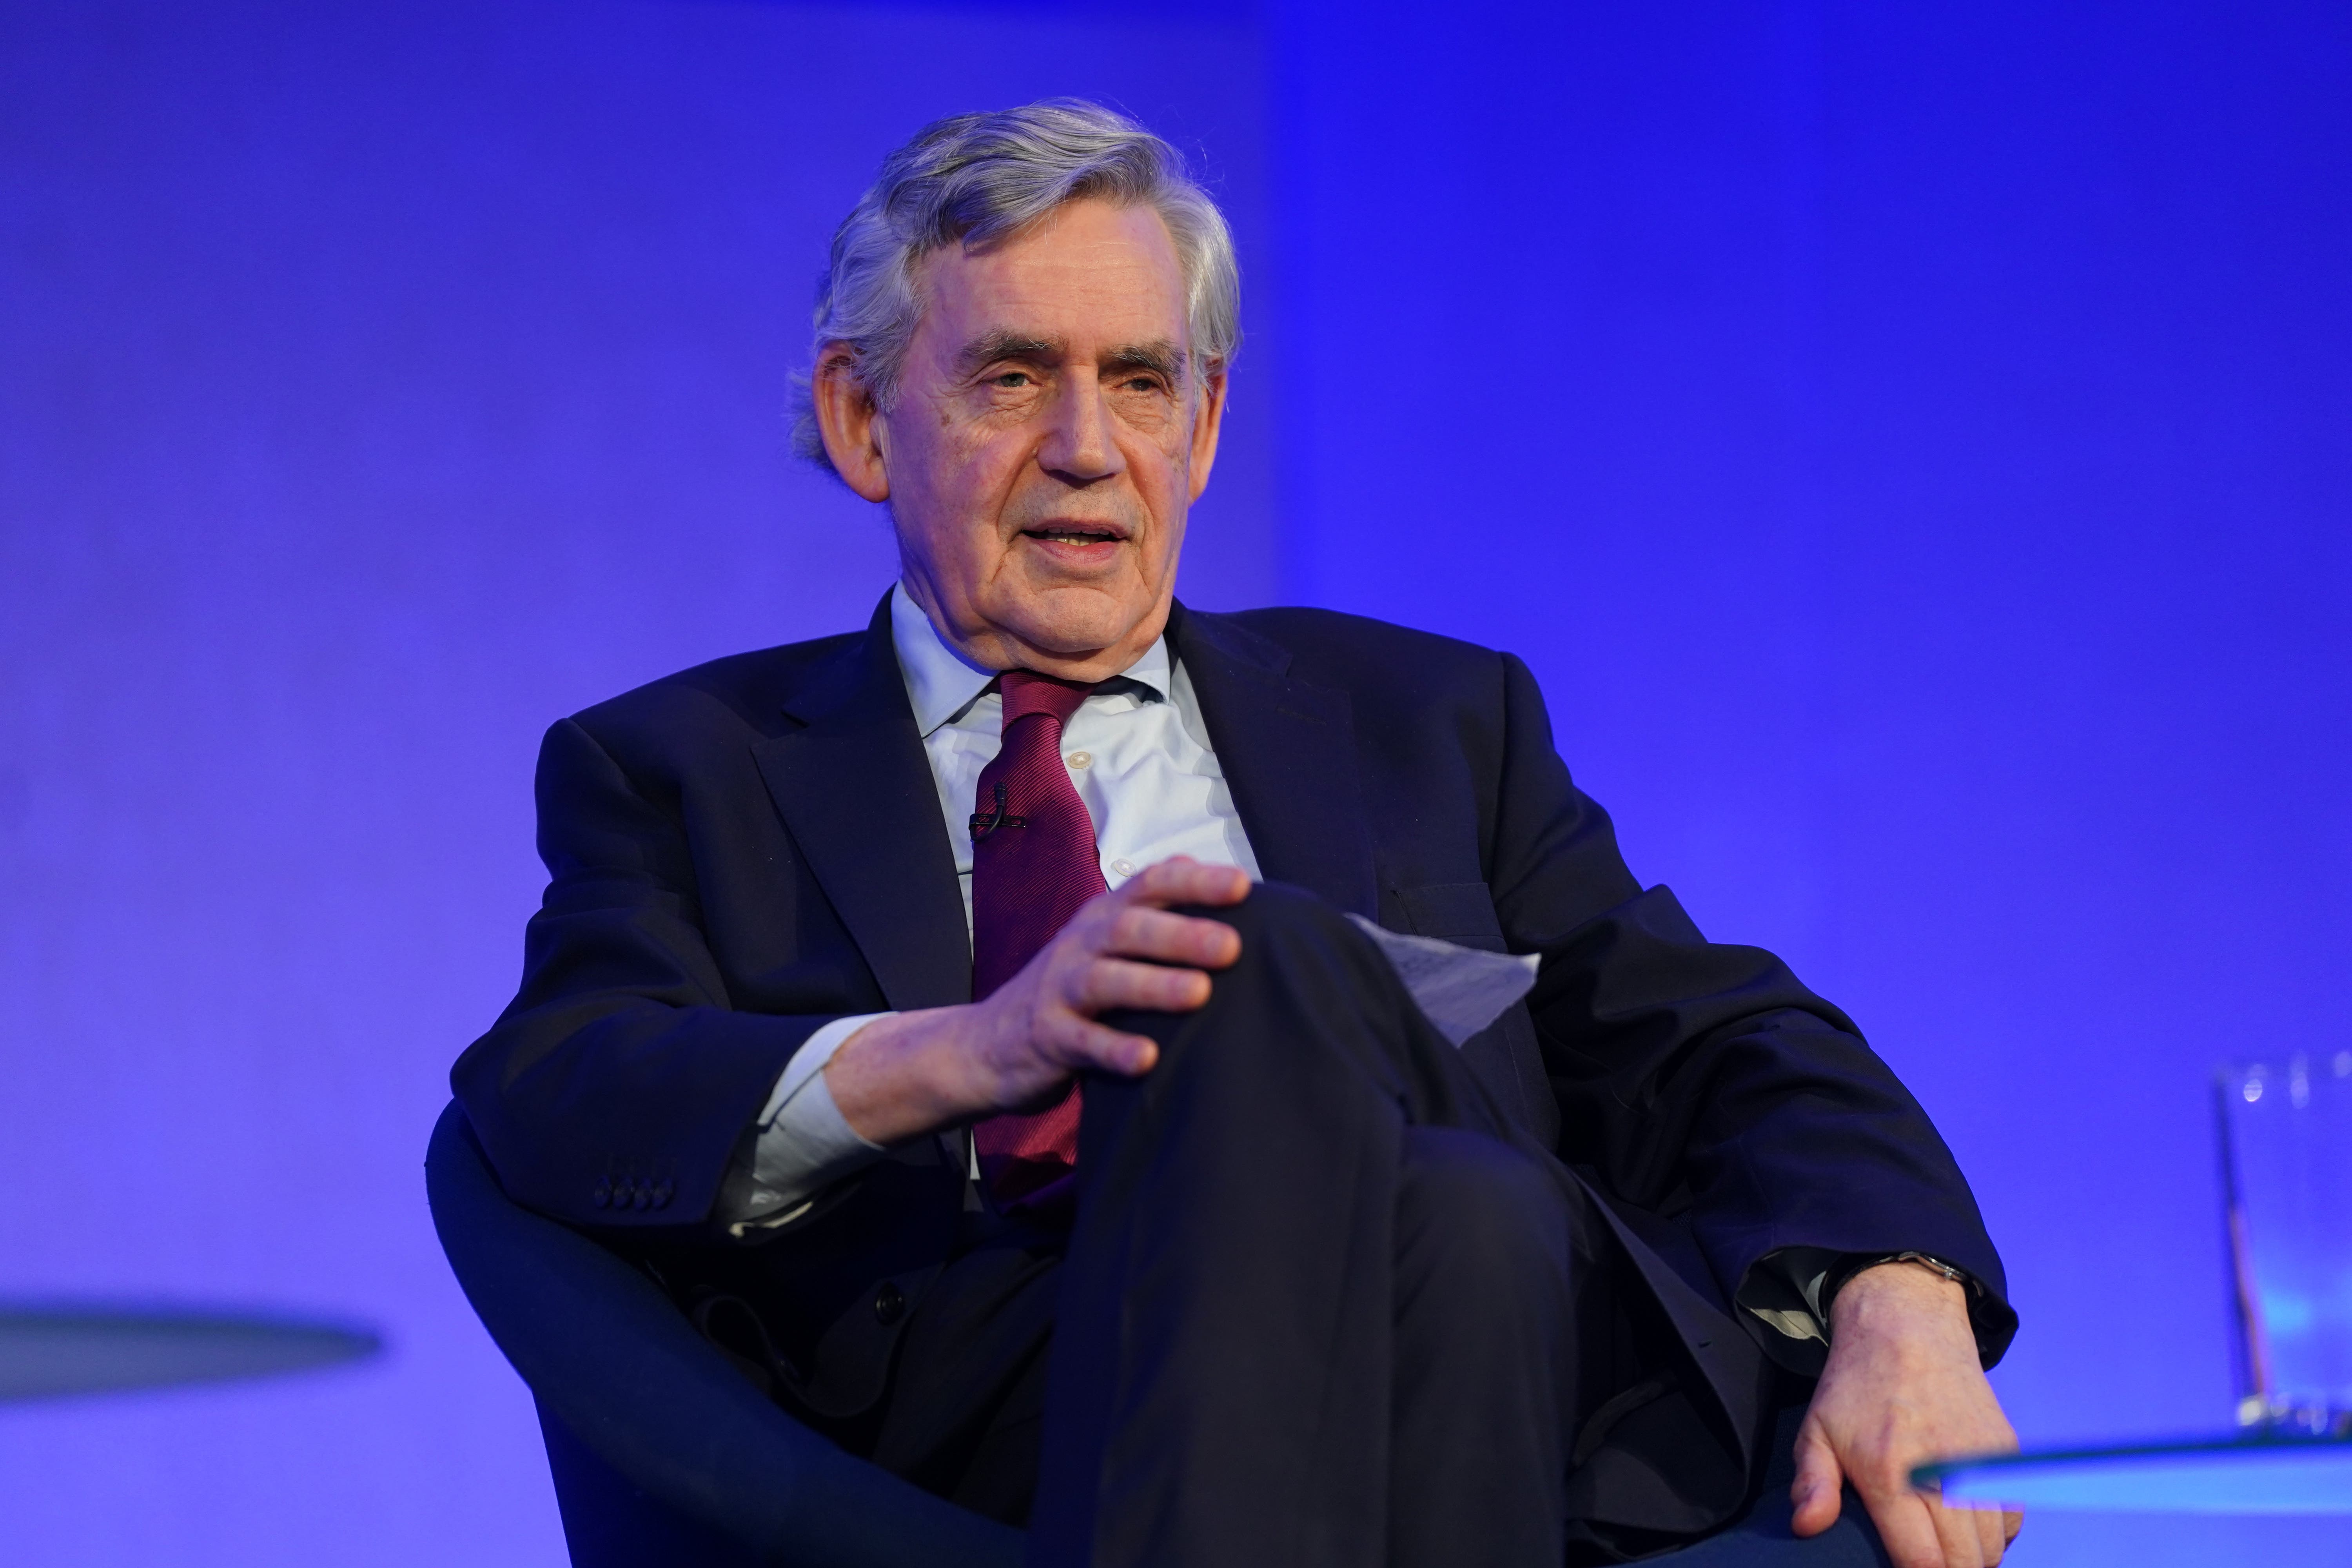 Former prime minister Gordon Brown calls for poverty to be tackled (Lucy North/PA)